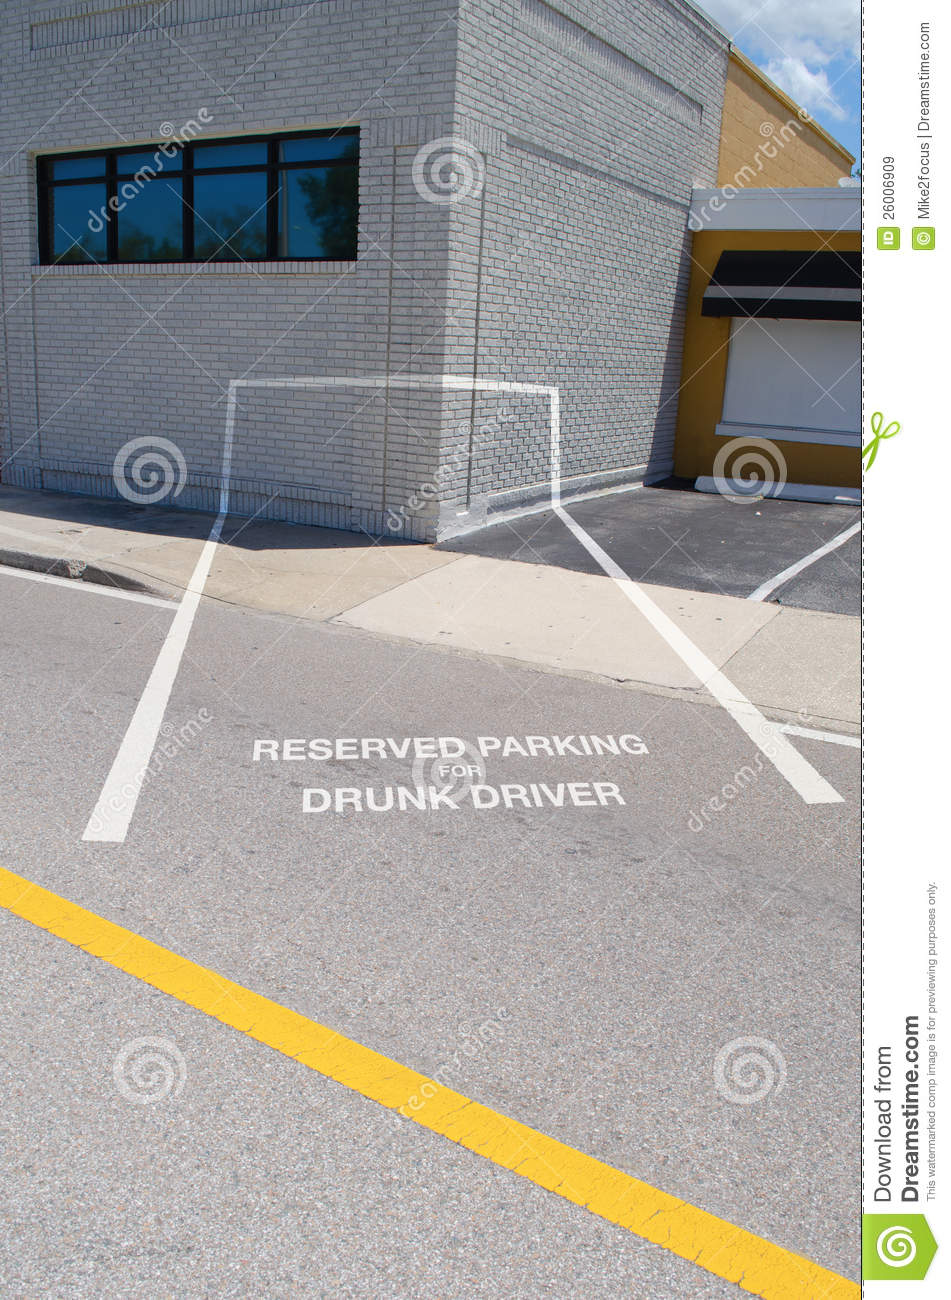 Reserved Parking For Drunk Driver Spot Which Is Painted Into The